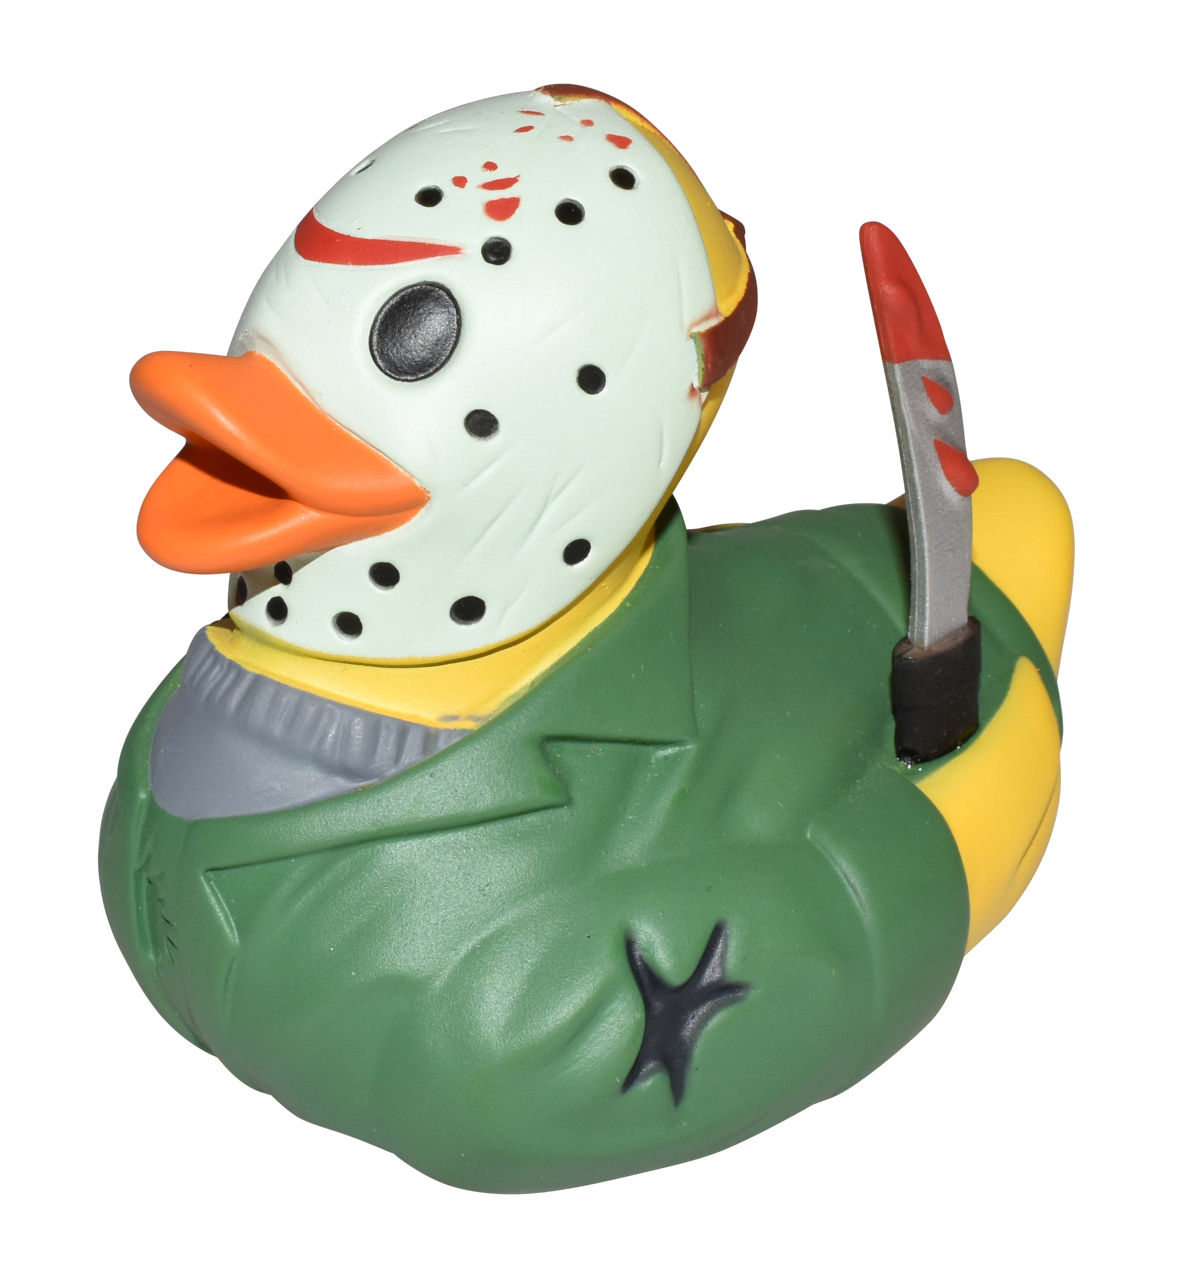 JSON is not scary anymore! Jason IS scary though, even as a duck.